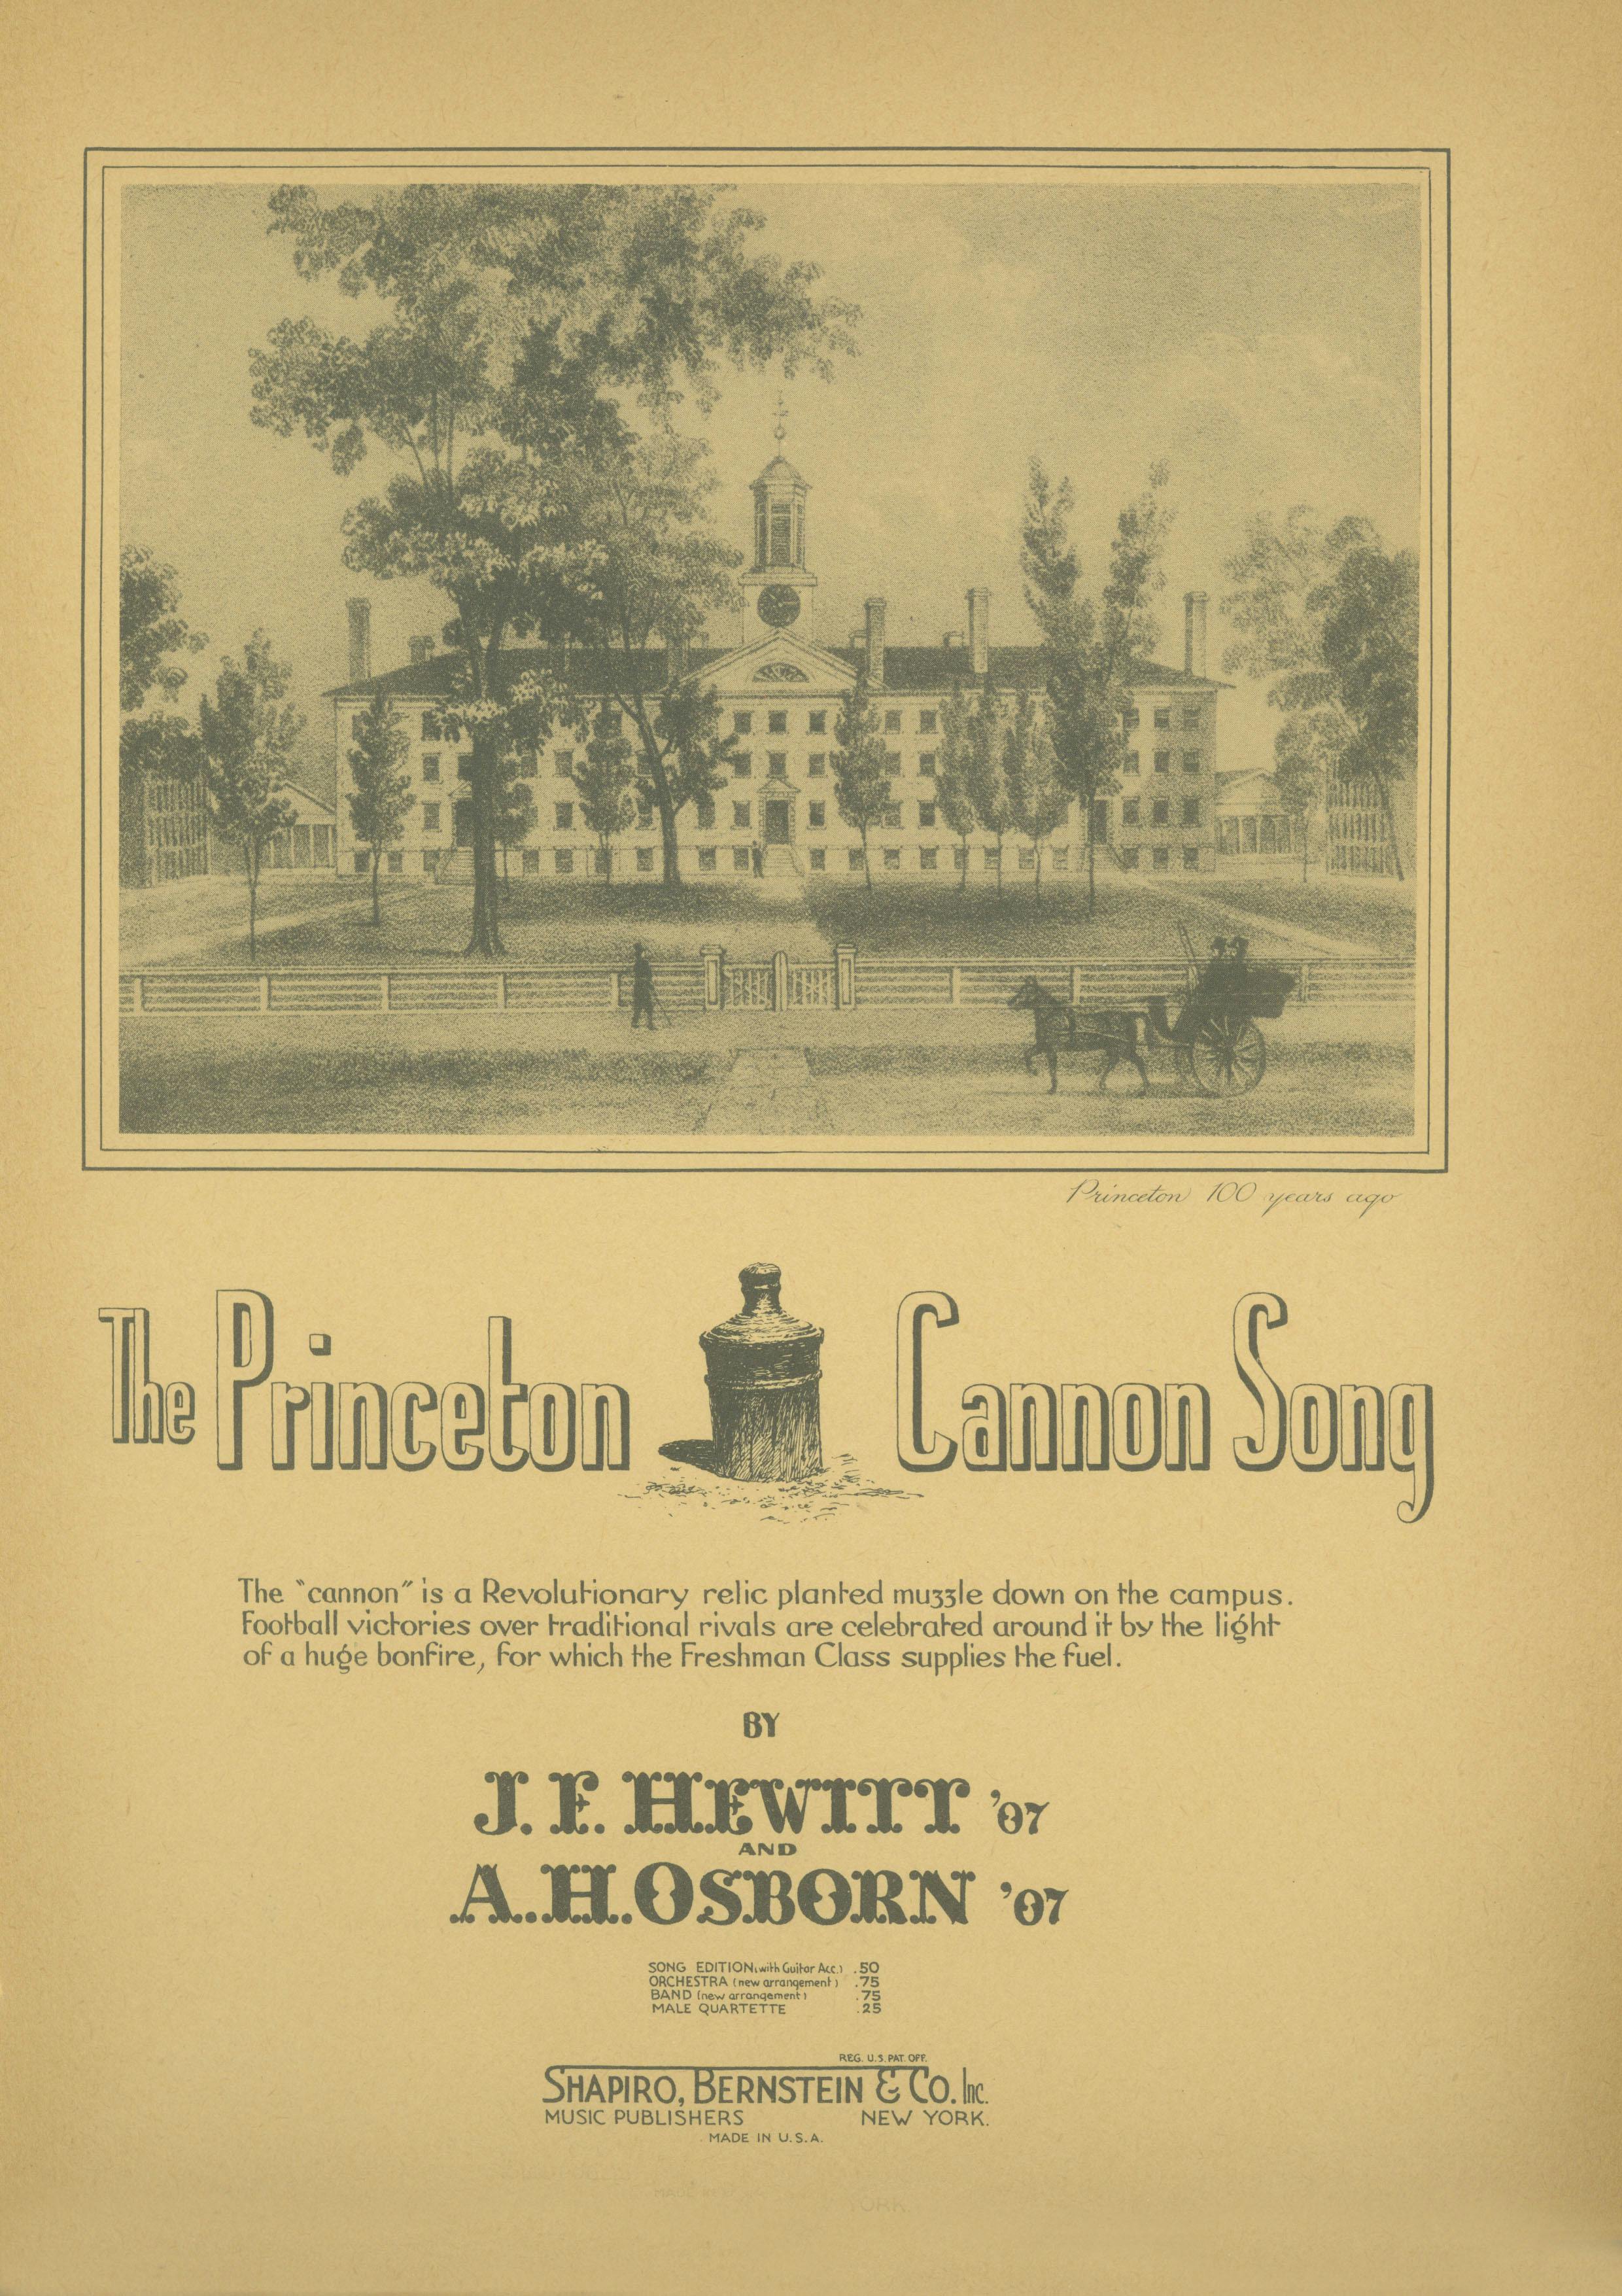 The Princeton Cannon Song - A. H. Osborn, J. F. Hewitt